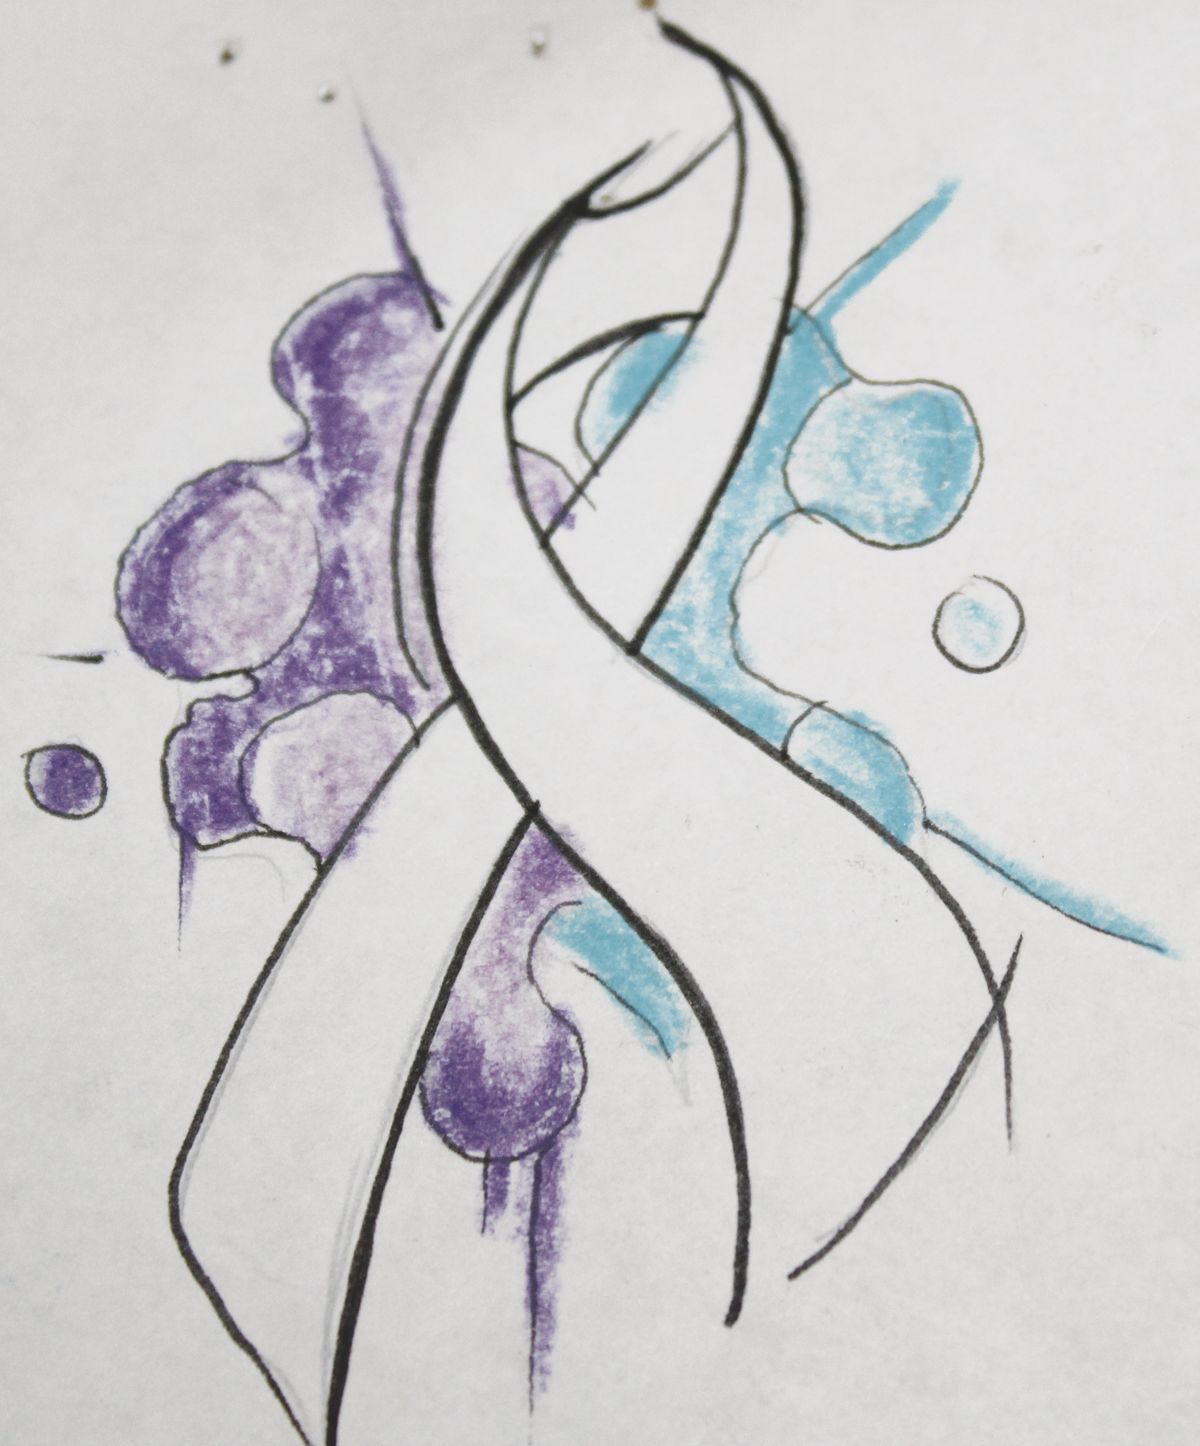 Pink and Blue Ribbon Tattoo Meaning Show Your Support and Care  Saved  Tattoo